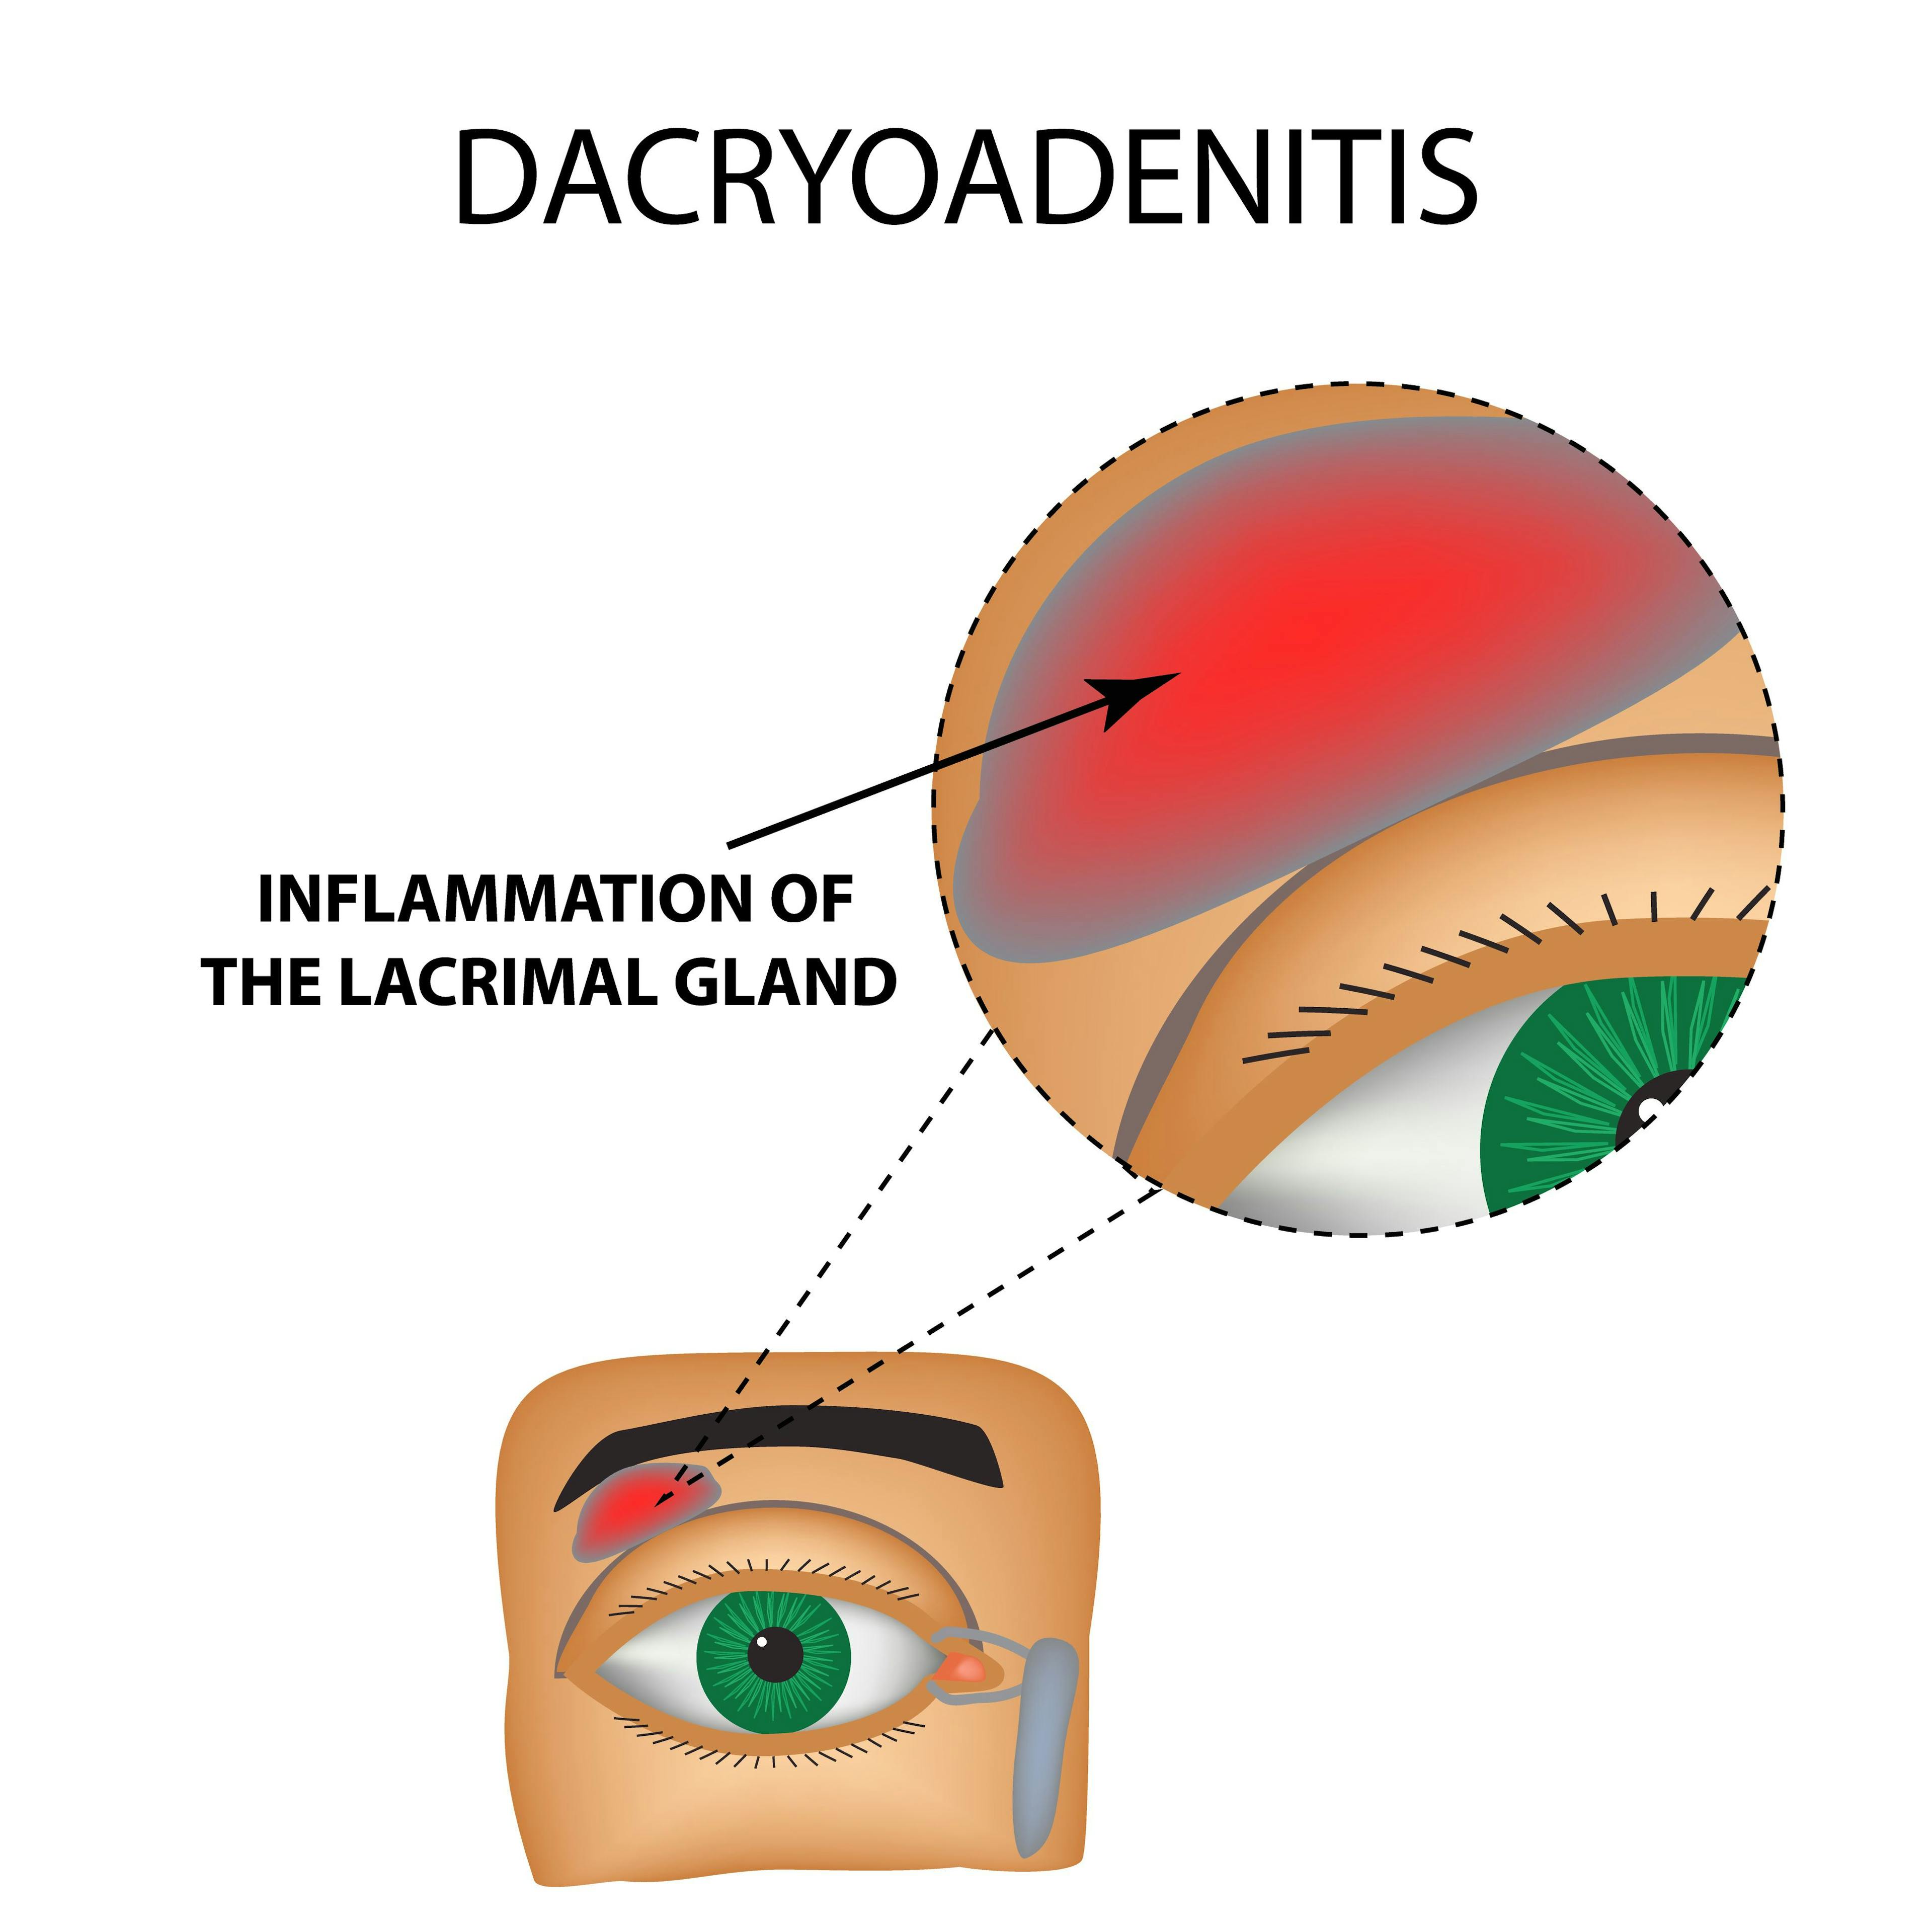 Chronic bilateral dacryoadenitis related to COVID-19